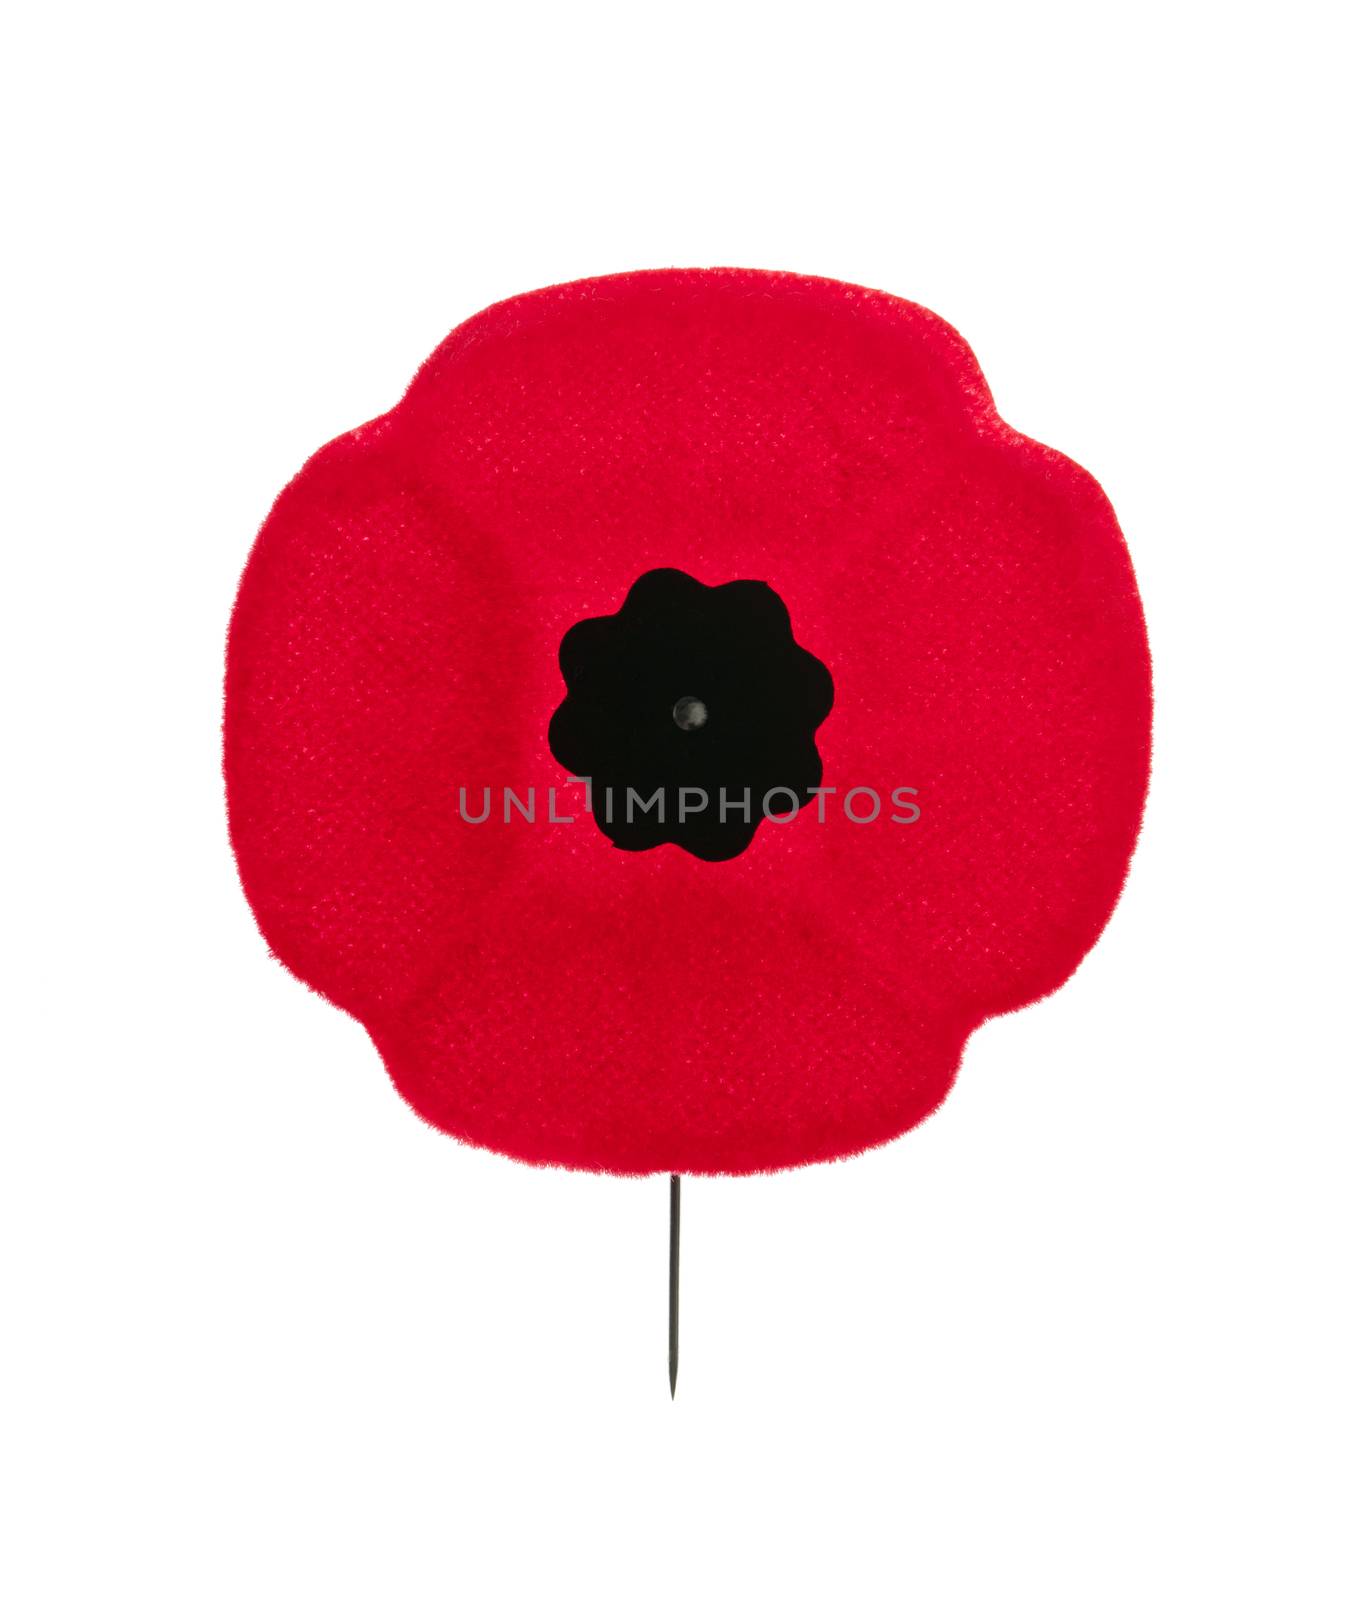 Red poppy lapel pin for Remembrance Day